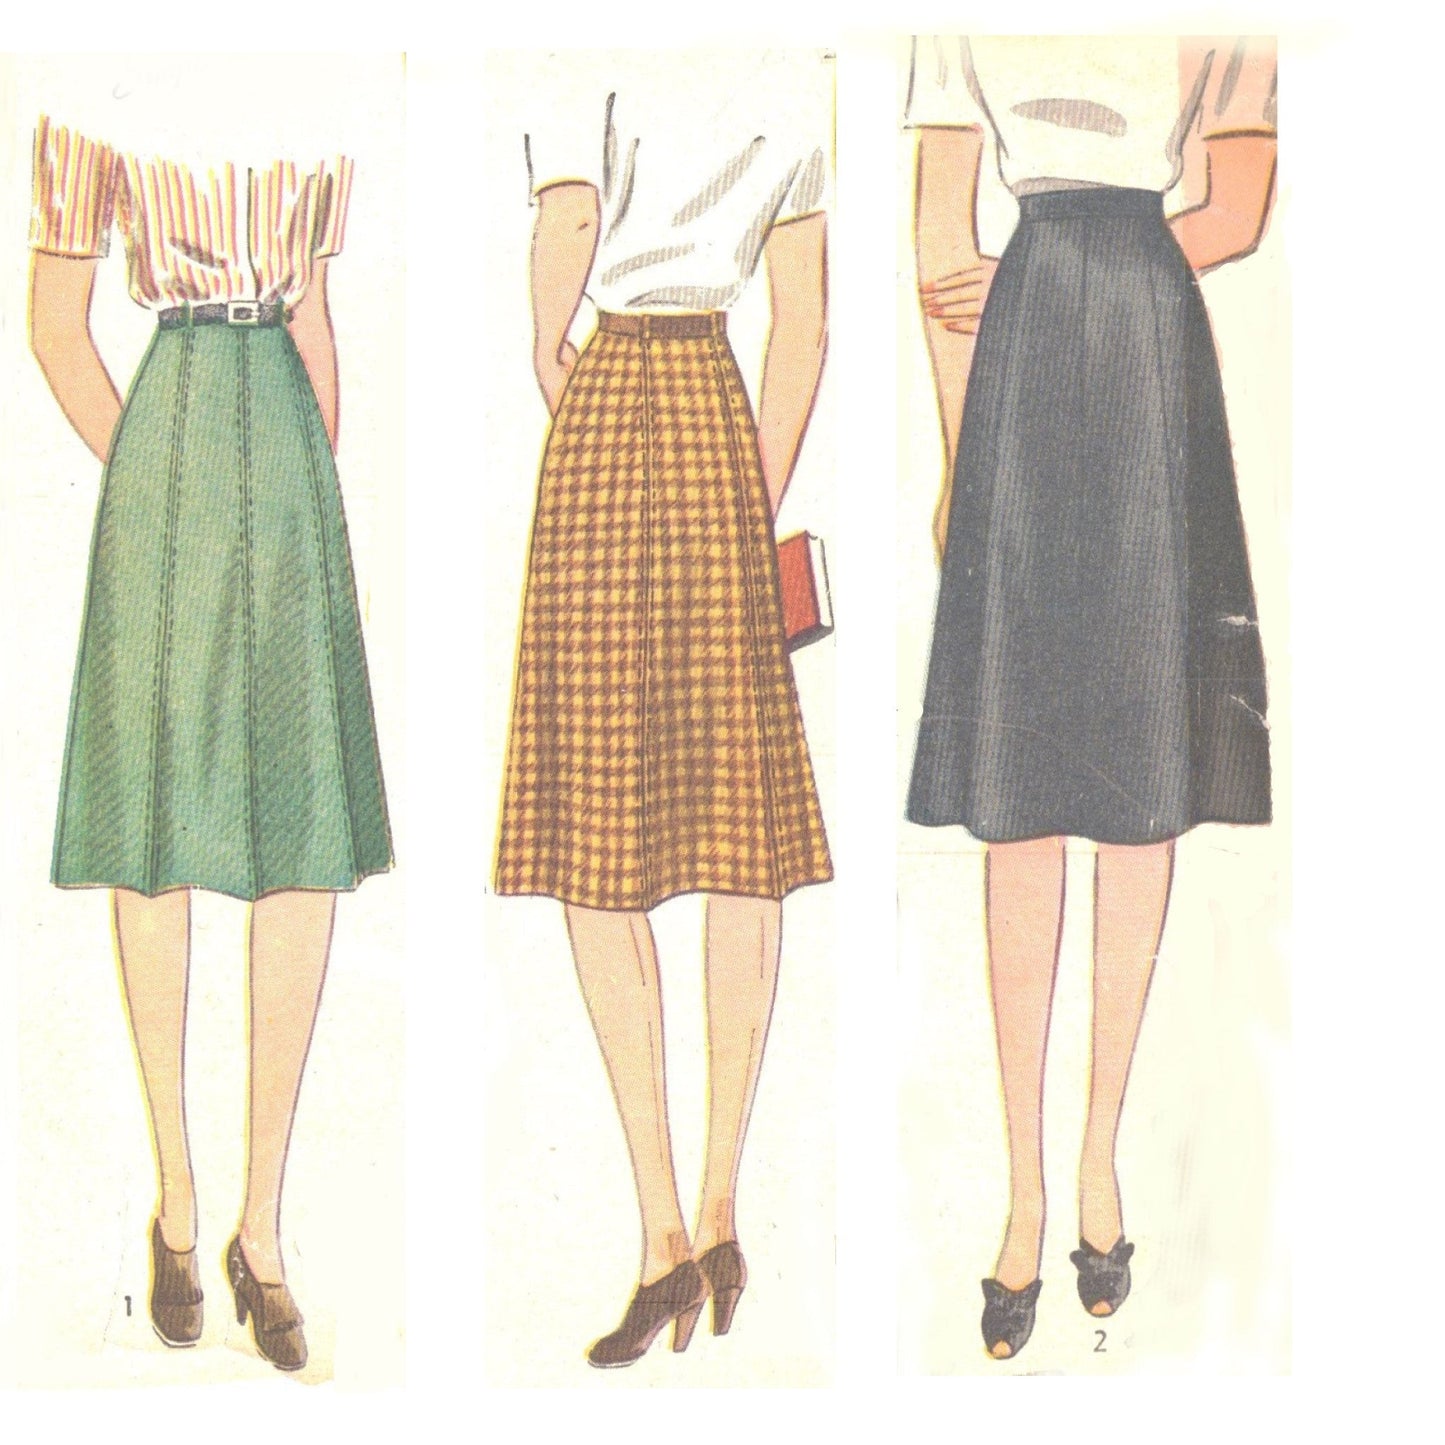 Model wearing skirts made from Simplicity 4355 pattern